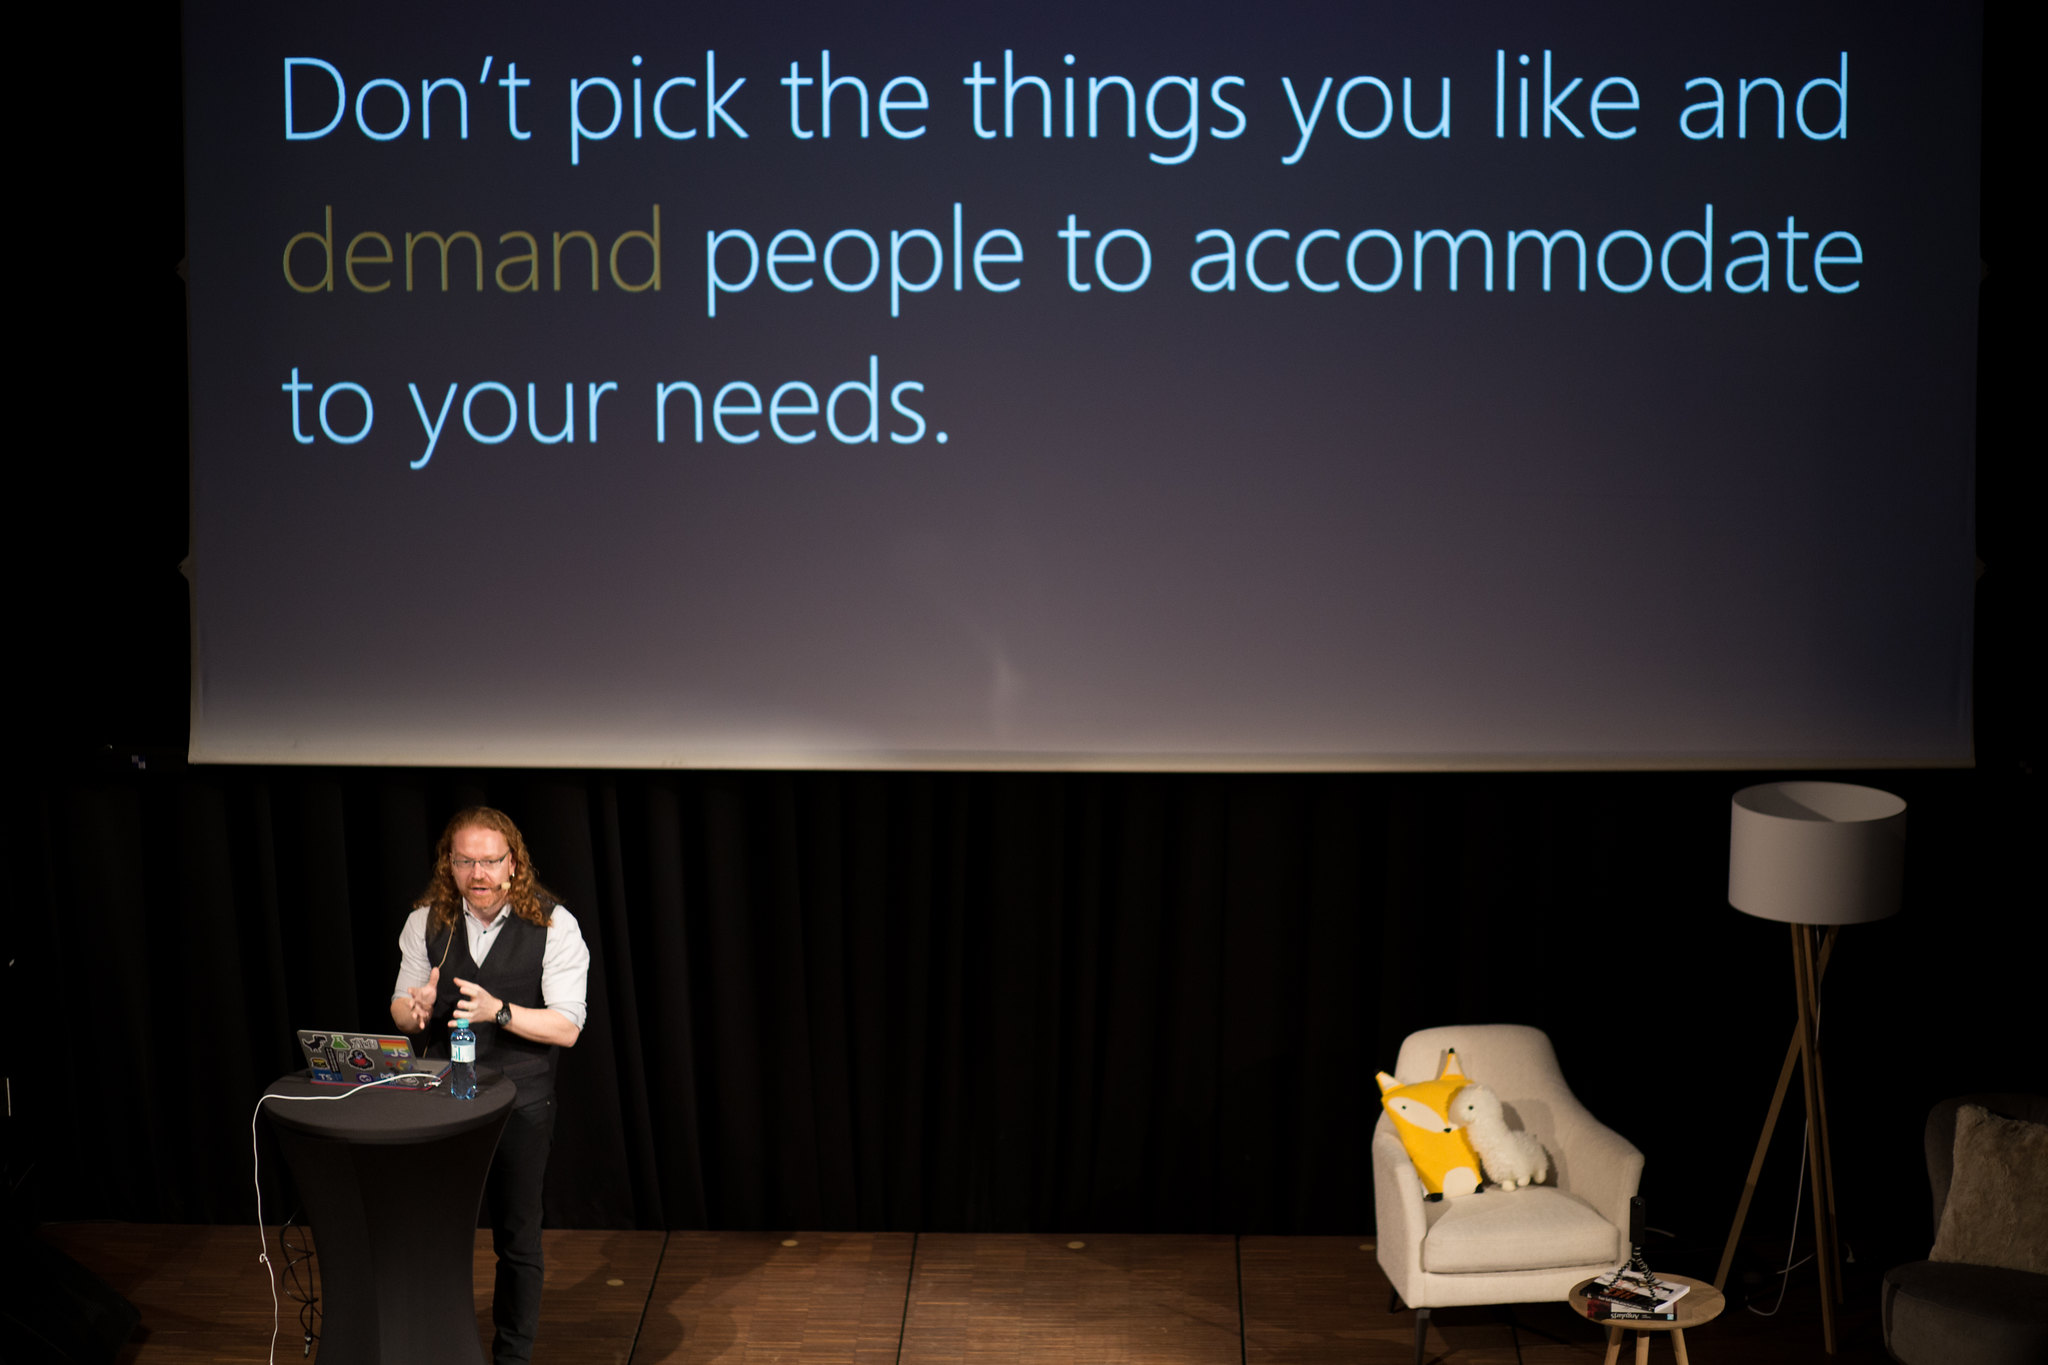 Don't pick things you like and demand people to accommodate to your needs